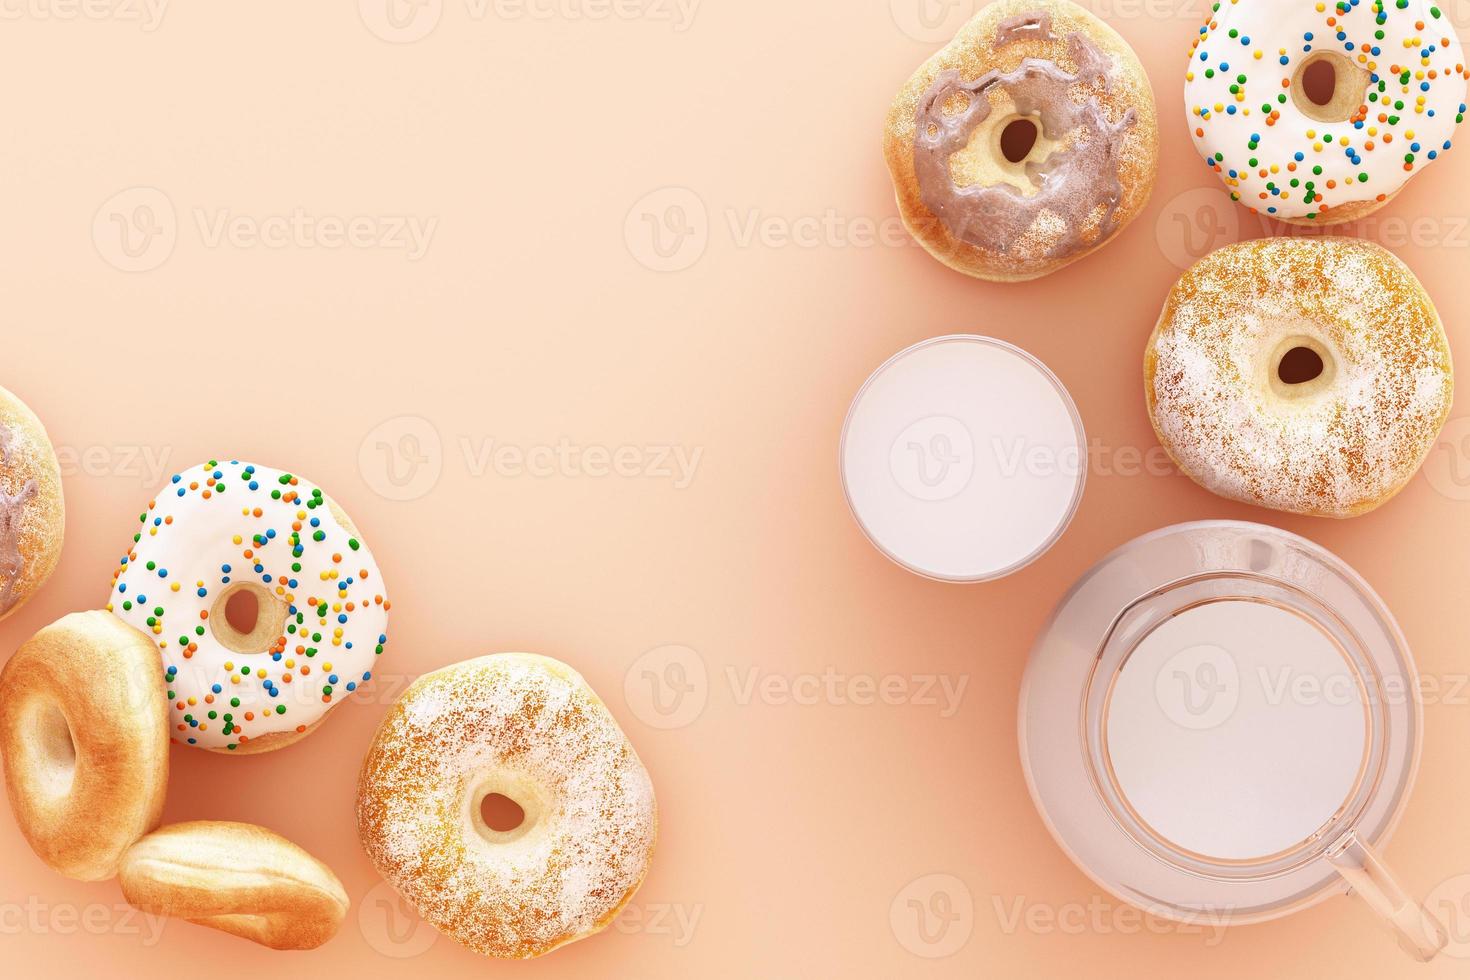 food and sweet on pastel background 3d rendering photo